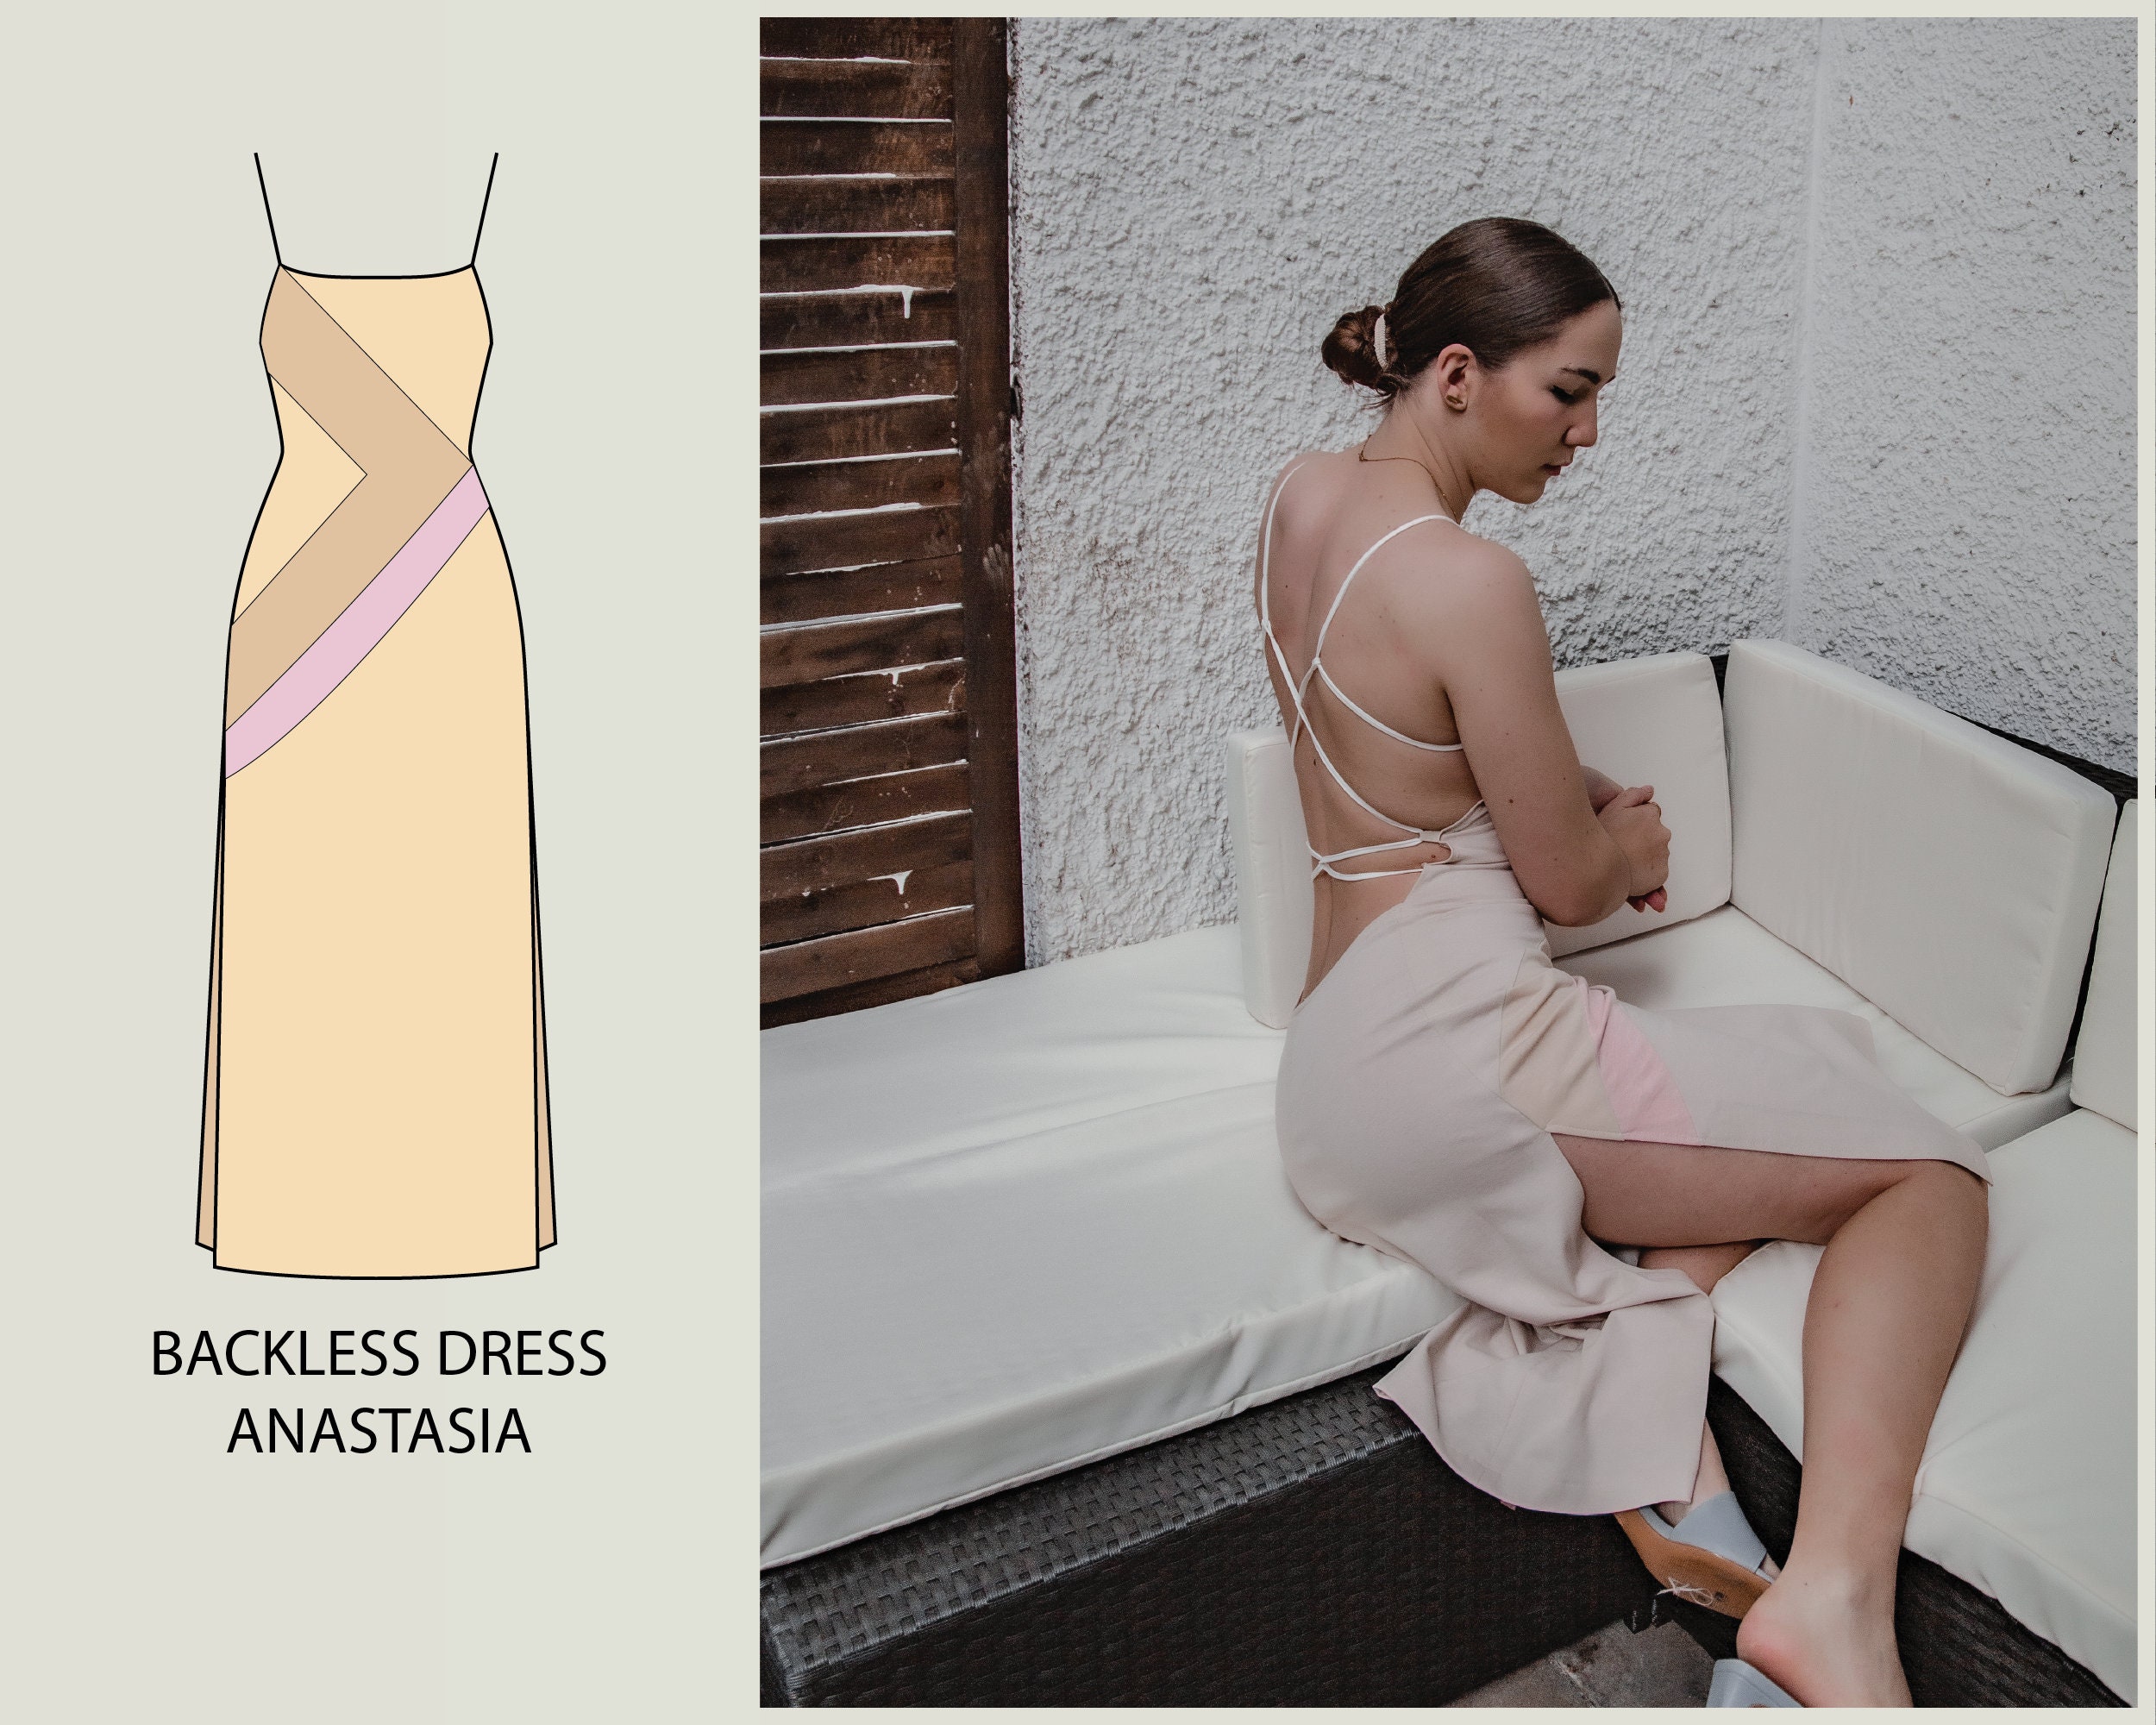 With these simple beauty hacks, you too can rock a backless dress